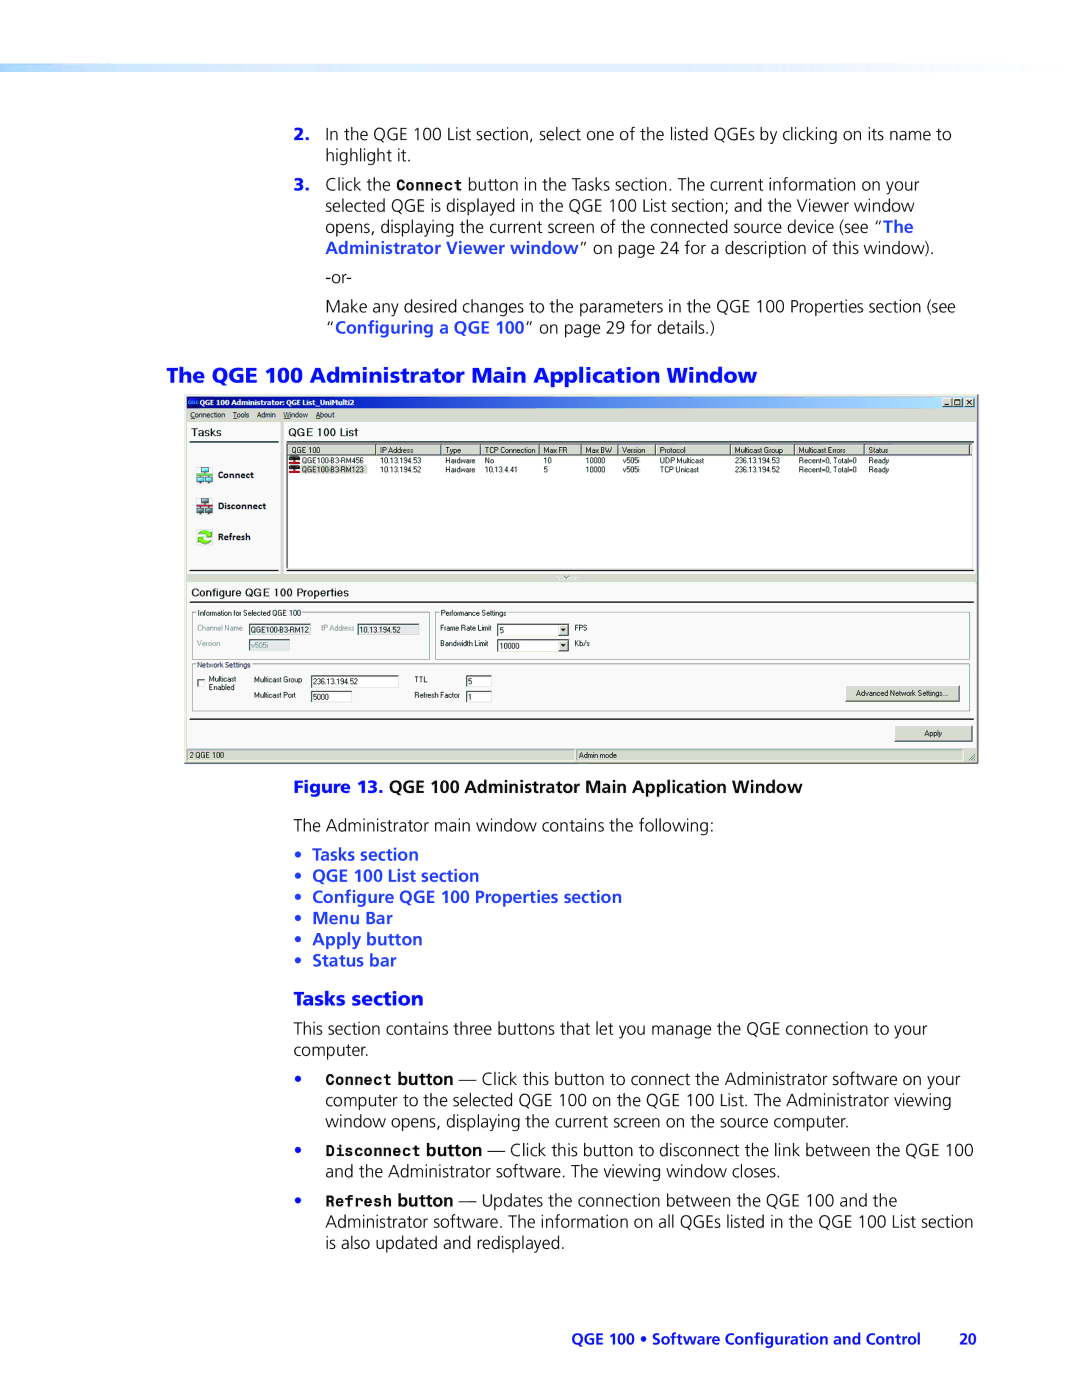 Extron electronic manual QGE 100 Administrator Main Application Window, Tasks section 